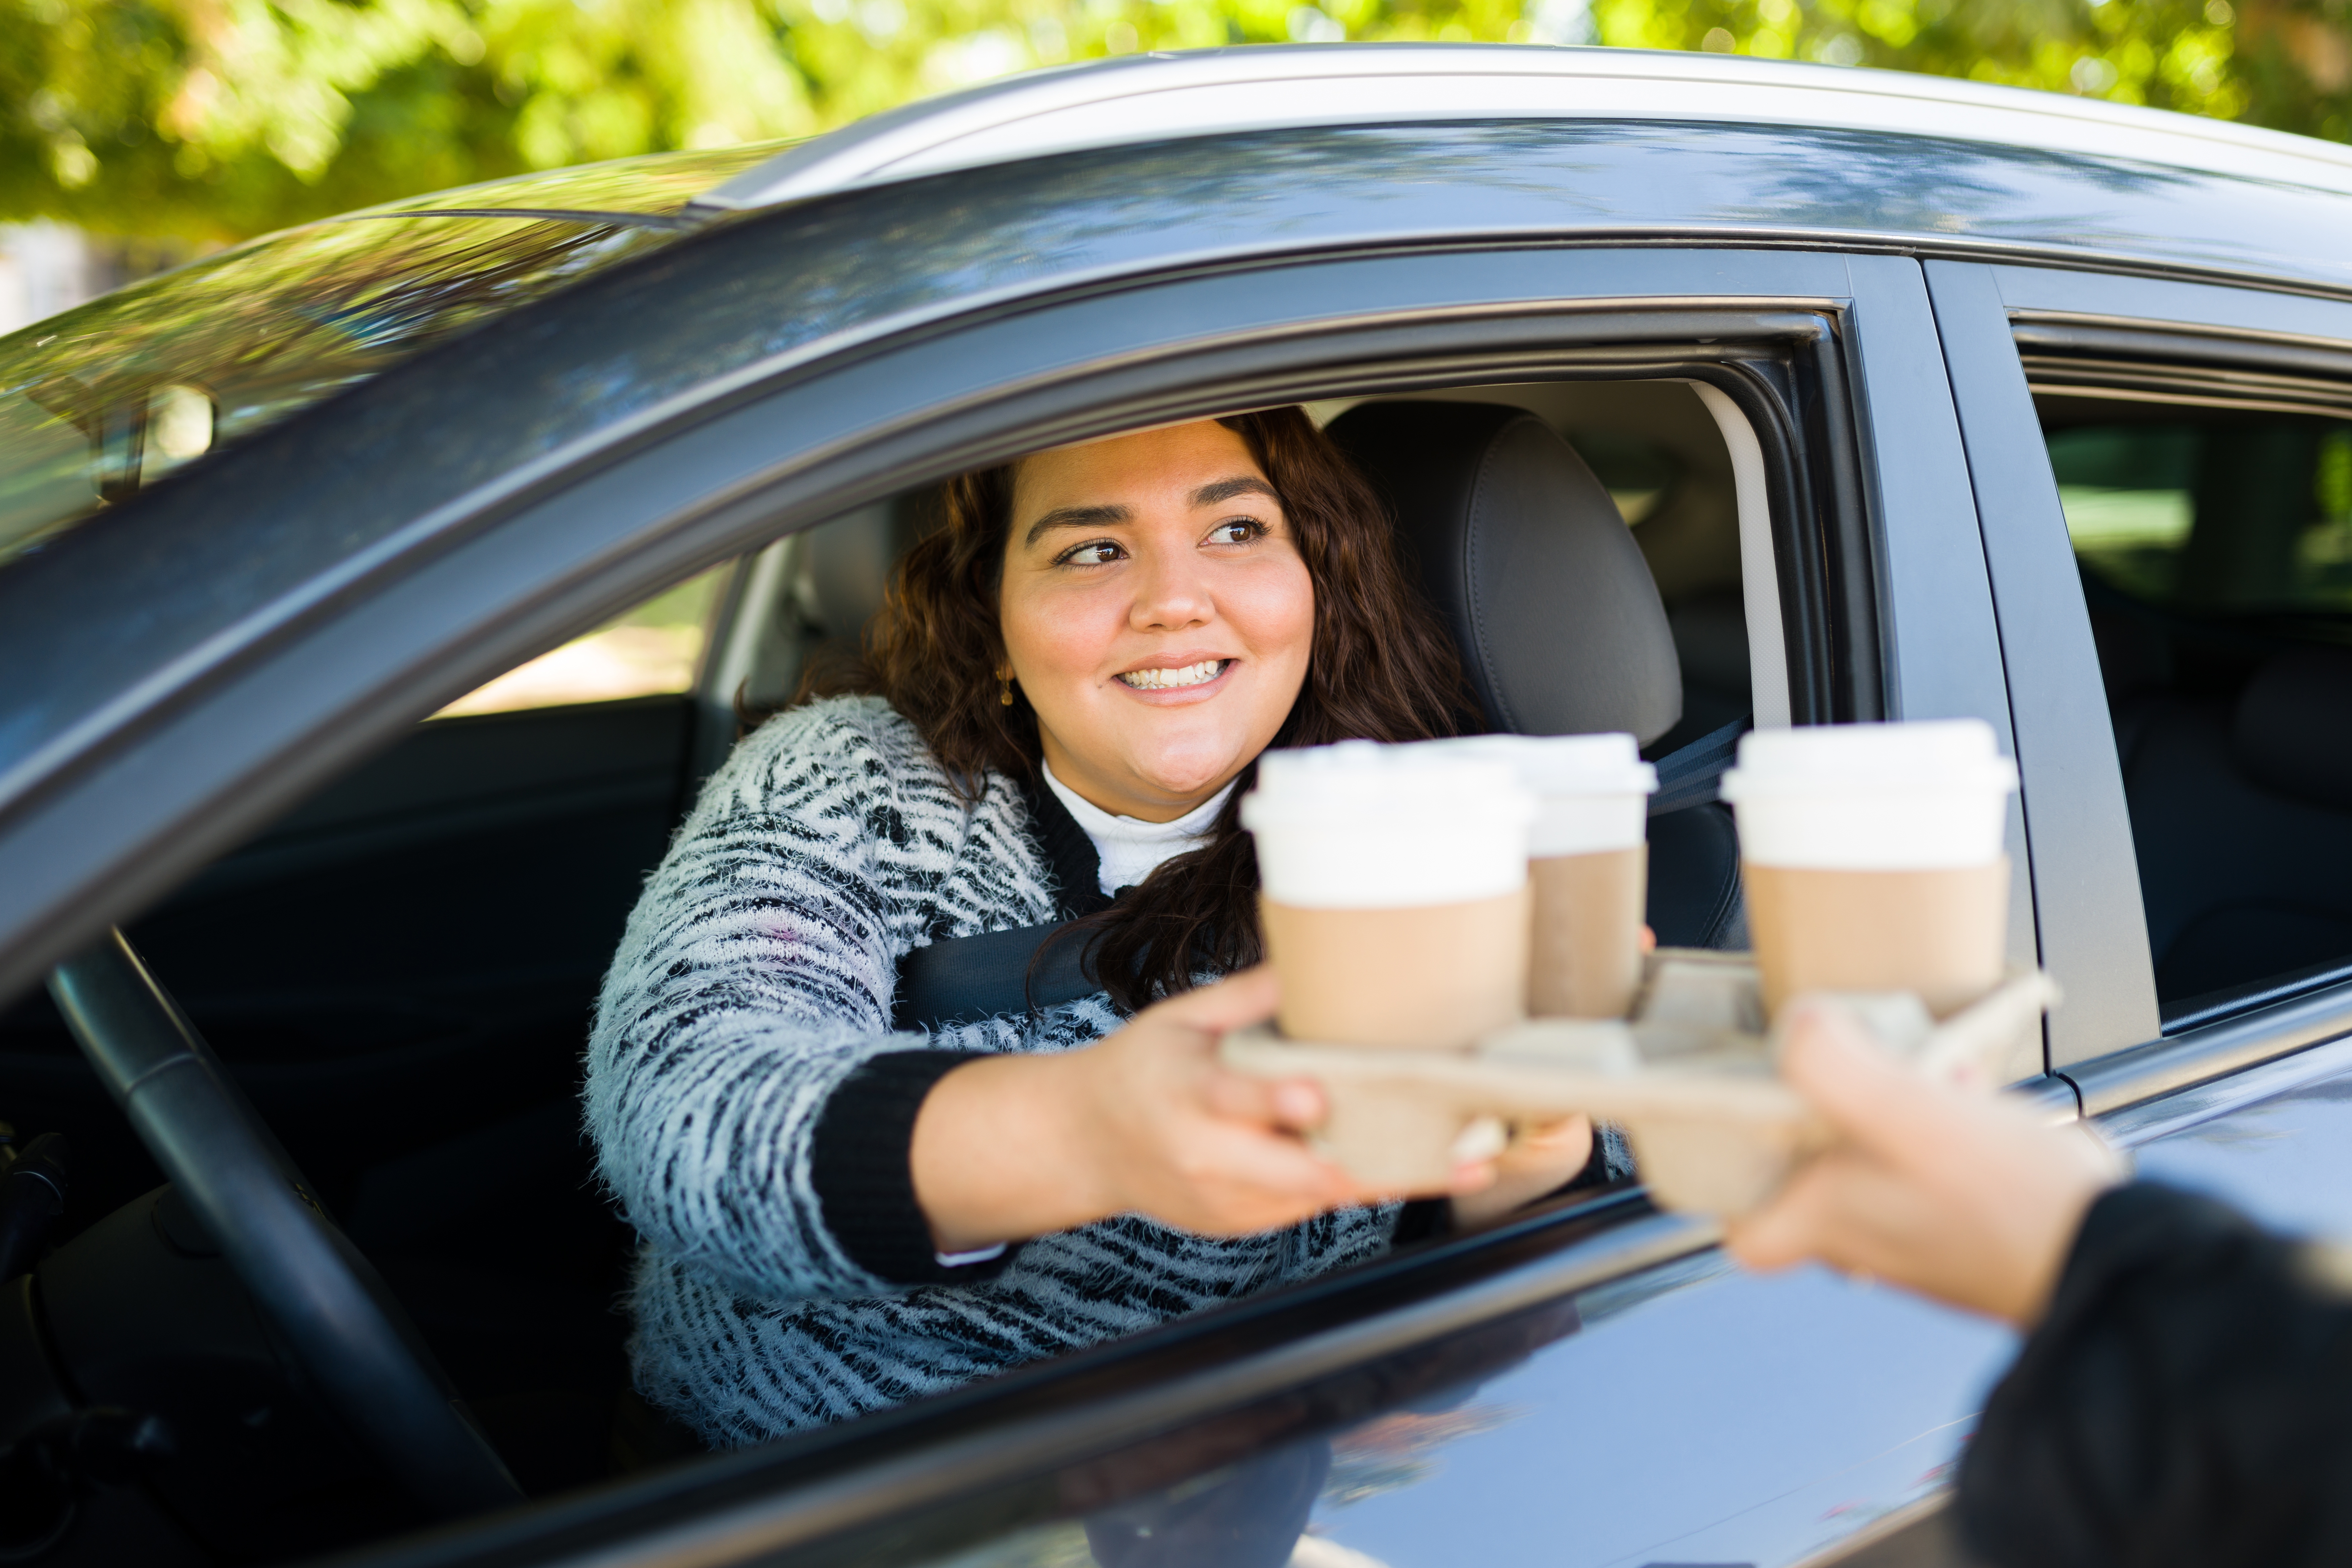 Woman driving her car on a through a drive thru buying coffee | Source: Shutterstock